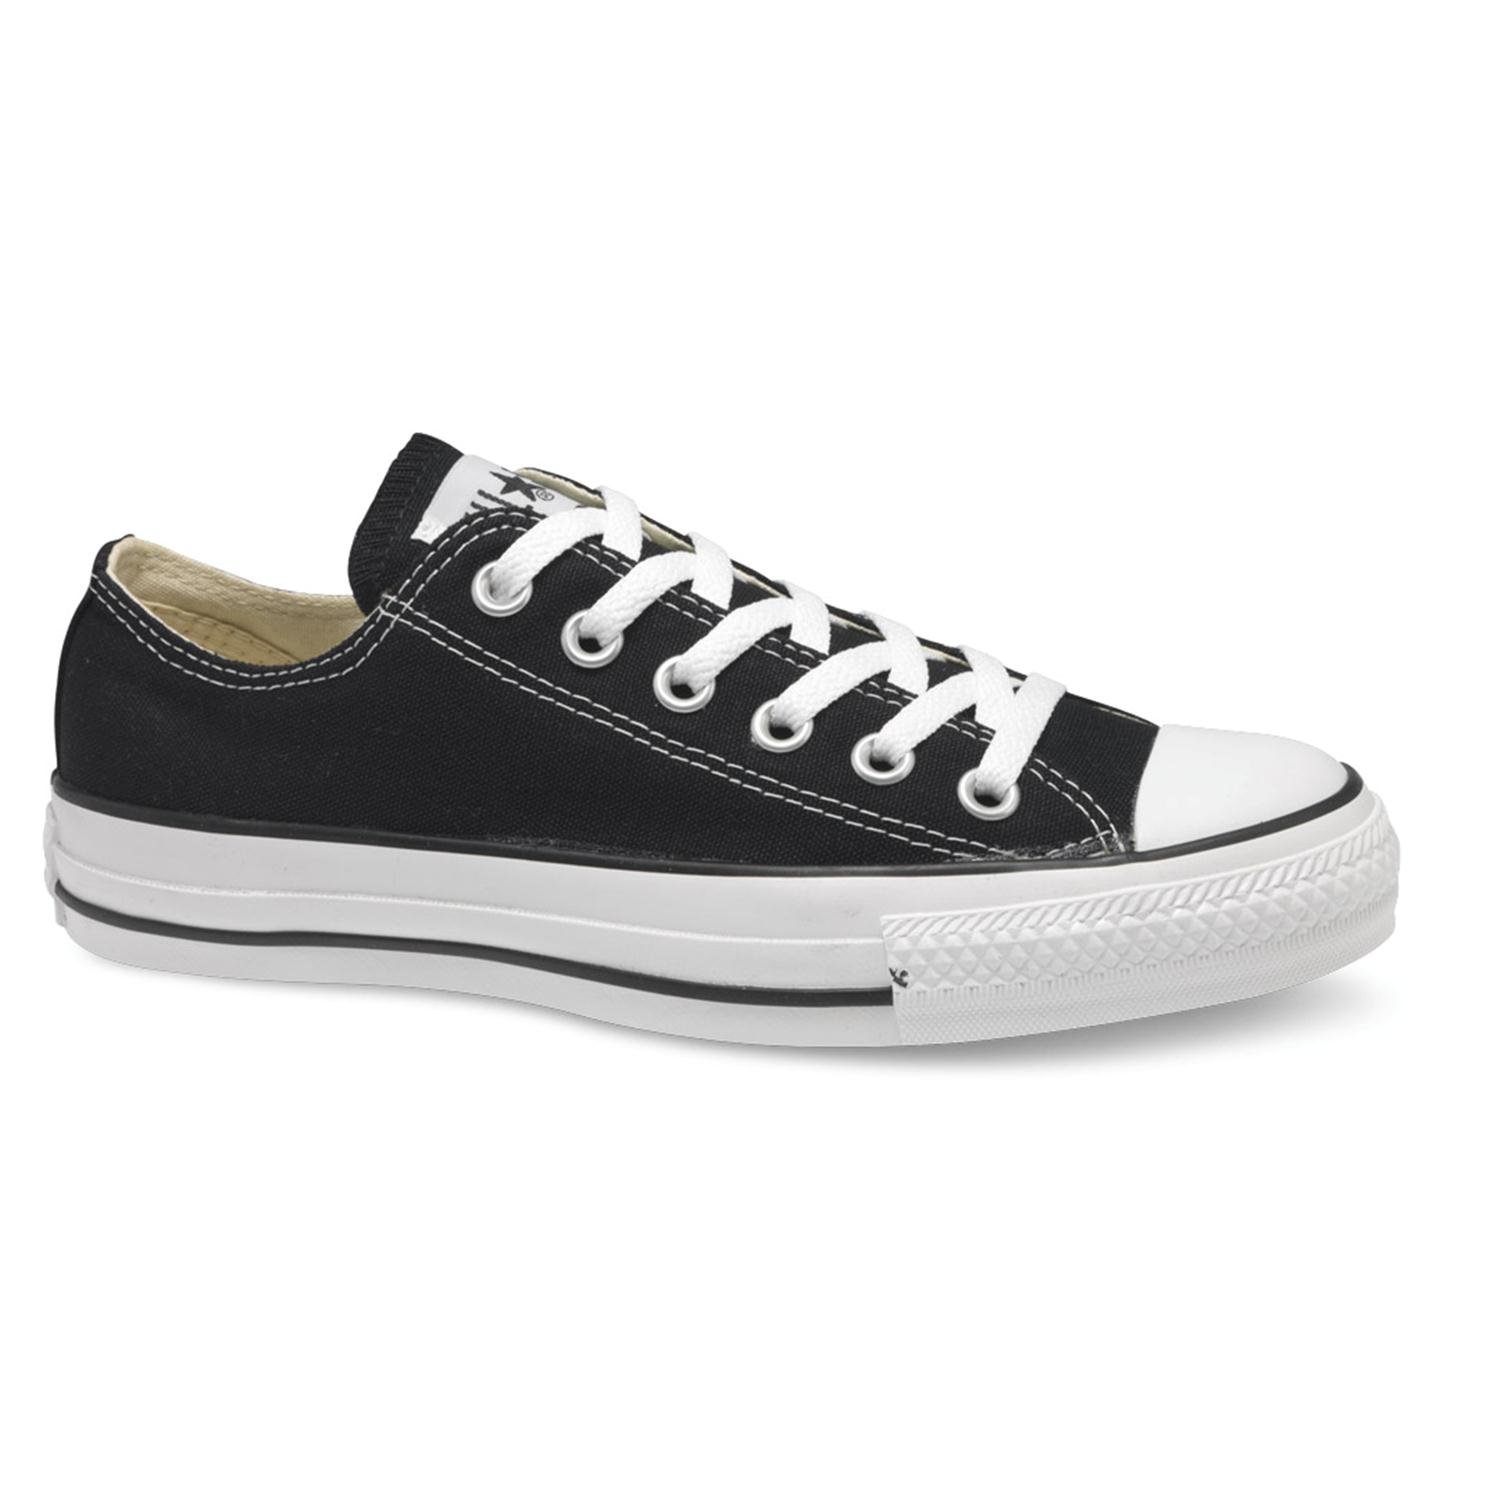 Converse Chuck Taylor All Star Low Top Shoes | evo outlet - Converse Chuck Taylor Low Top